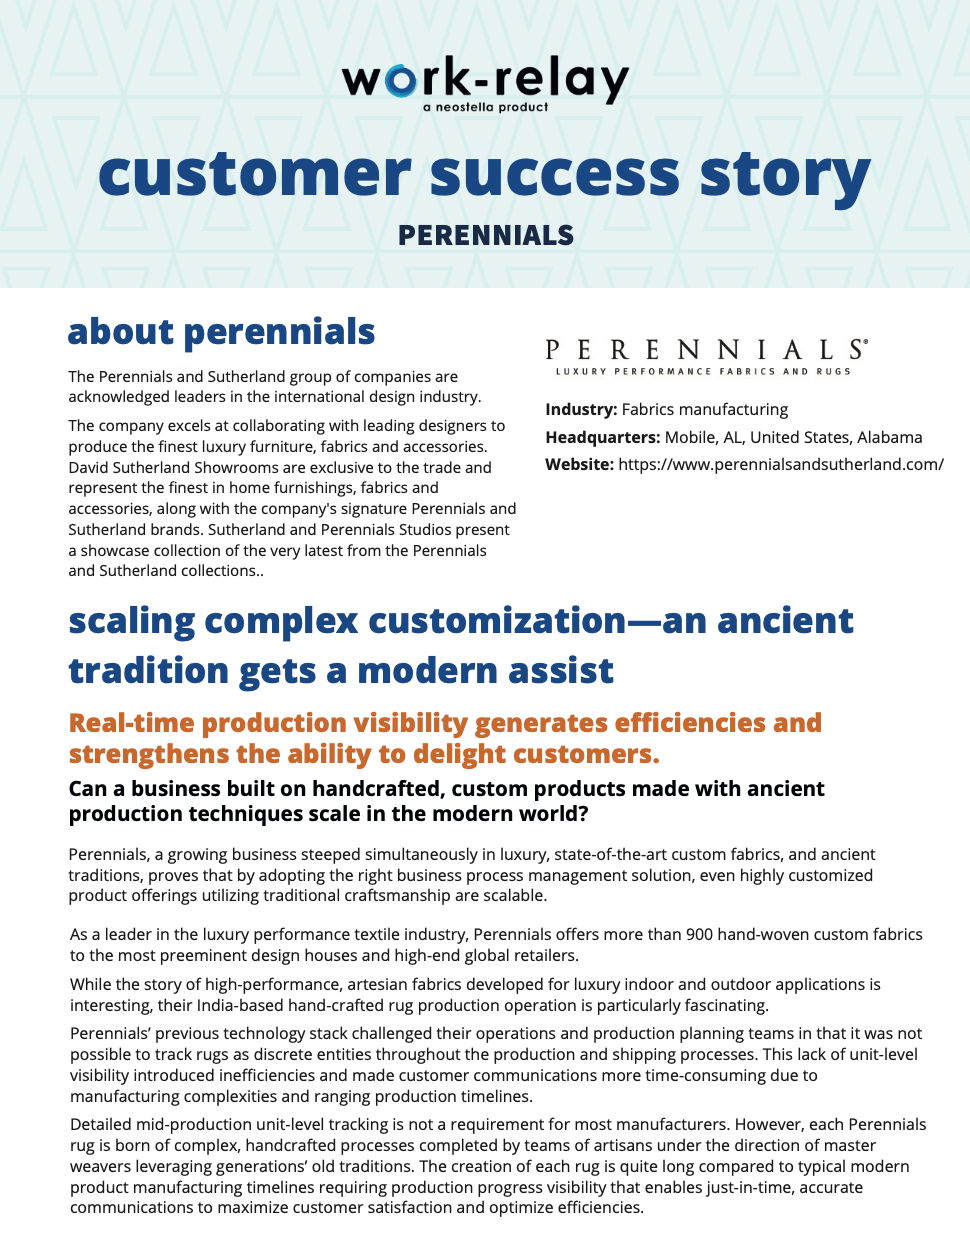 A preview of the customer success story download regarding how Perennials increased operational visibility using Work-Relay